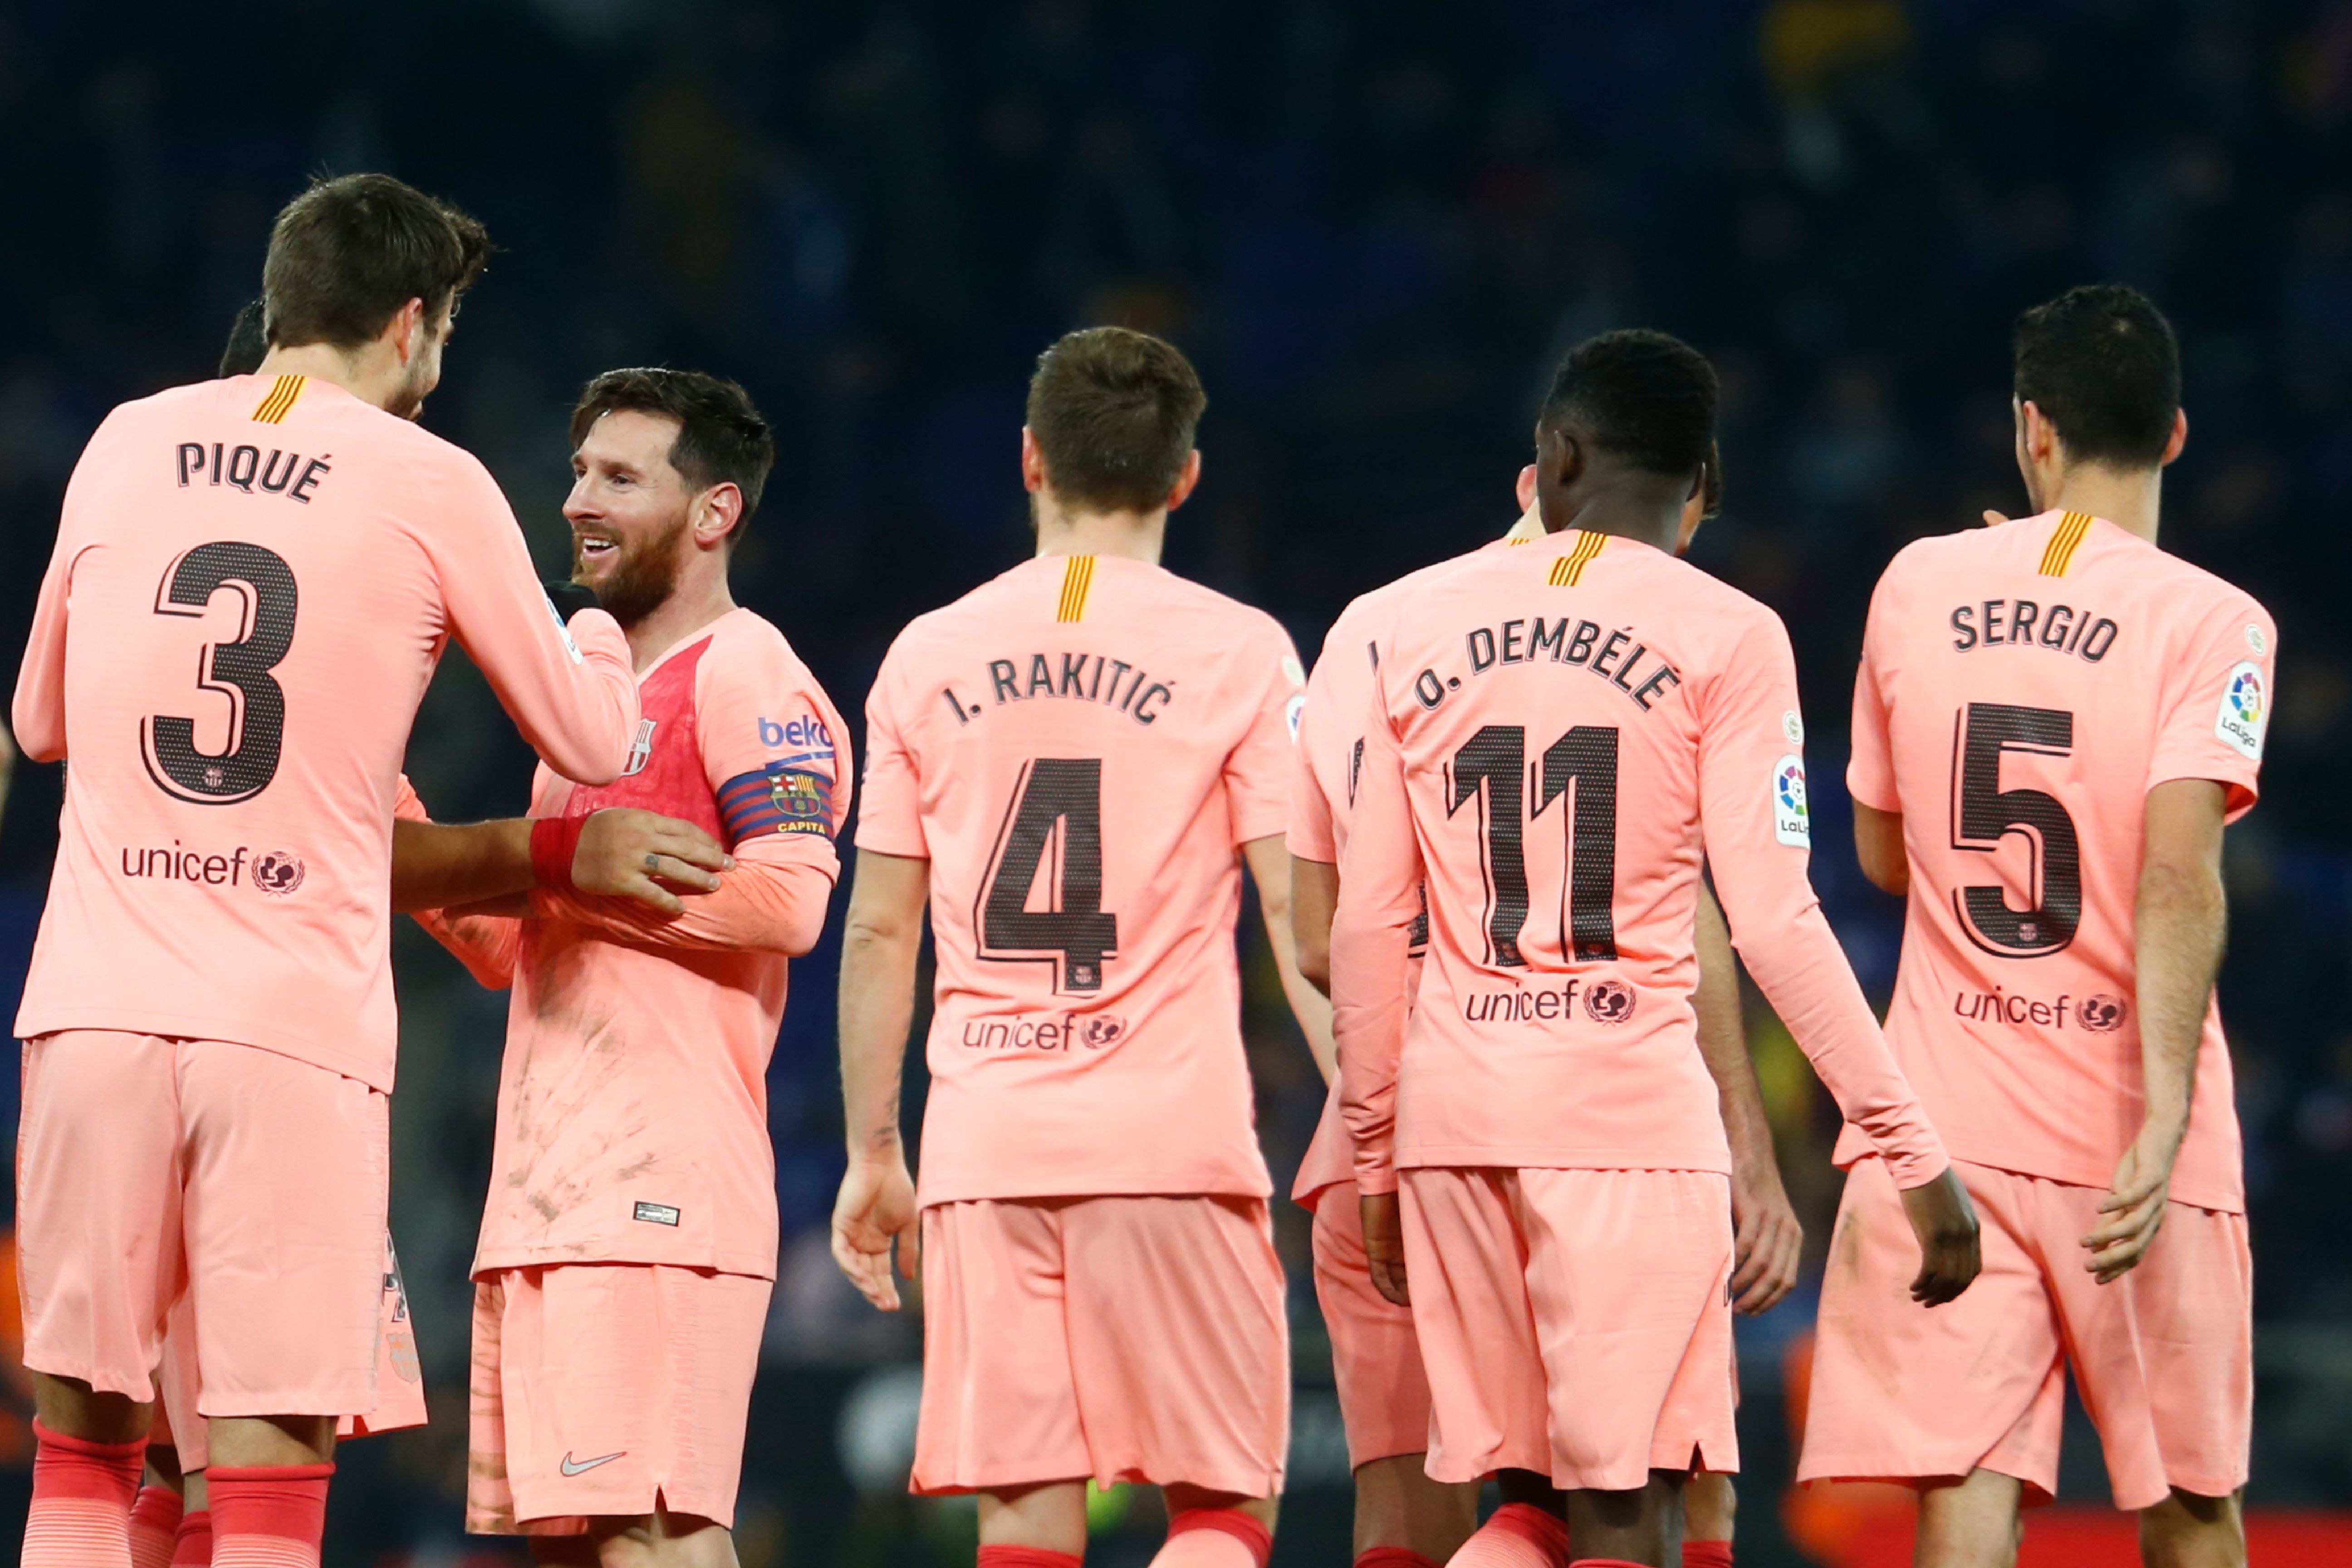 Barcelona's Argentinian forward Lionel Messi (2L) celebrates  with Barcelona's Spanish defender Gerard Pique  after scoring during the Spanish league football match RCD Espanyol against FC Barcelona at the RCDE Stadium in Cornella de Llobregat on December 8, 2018. (Photo by PAU BARRENA / AFP)        (Photo credit should read PAU BARRENA/AFP/Getty Images)